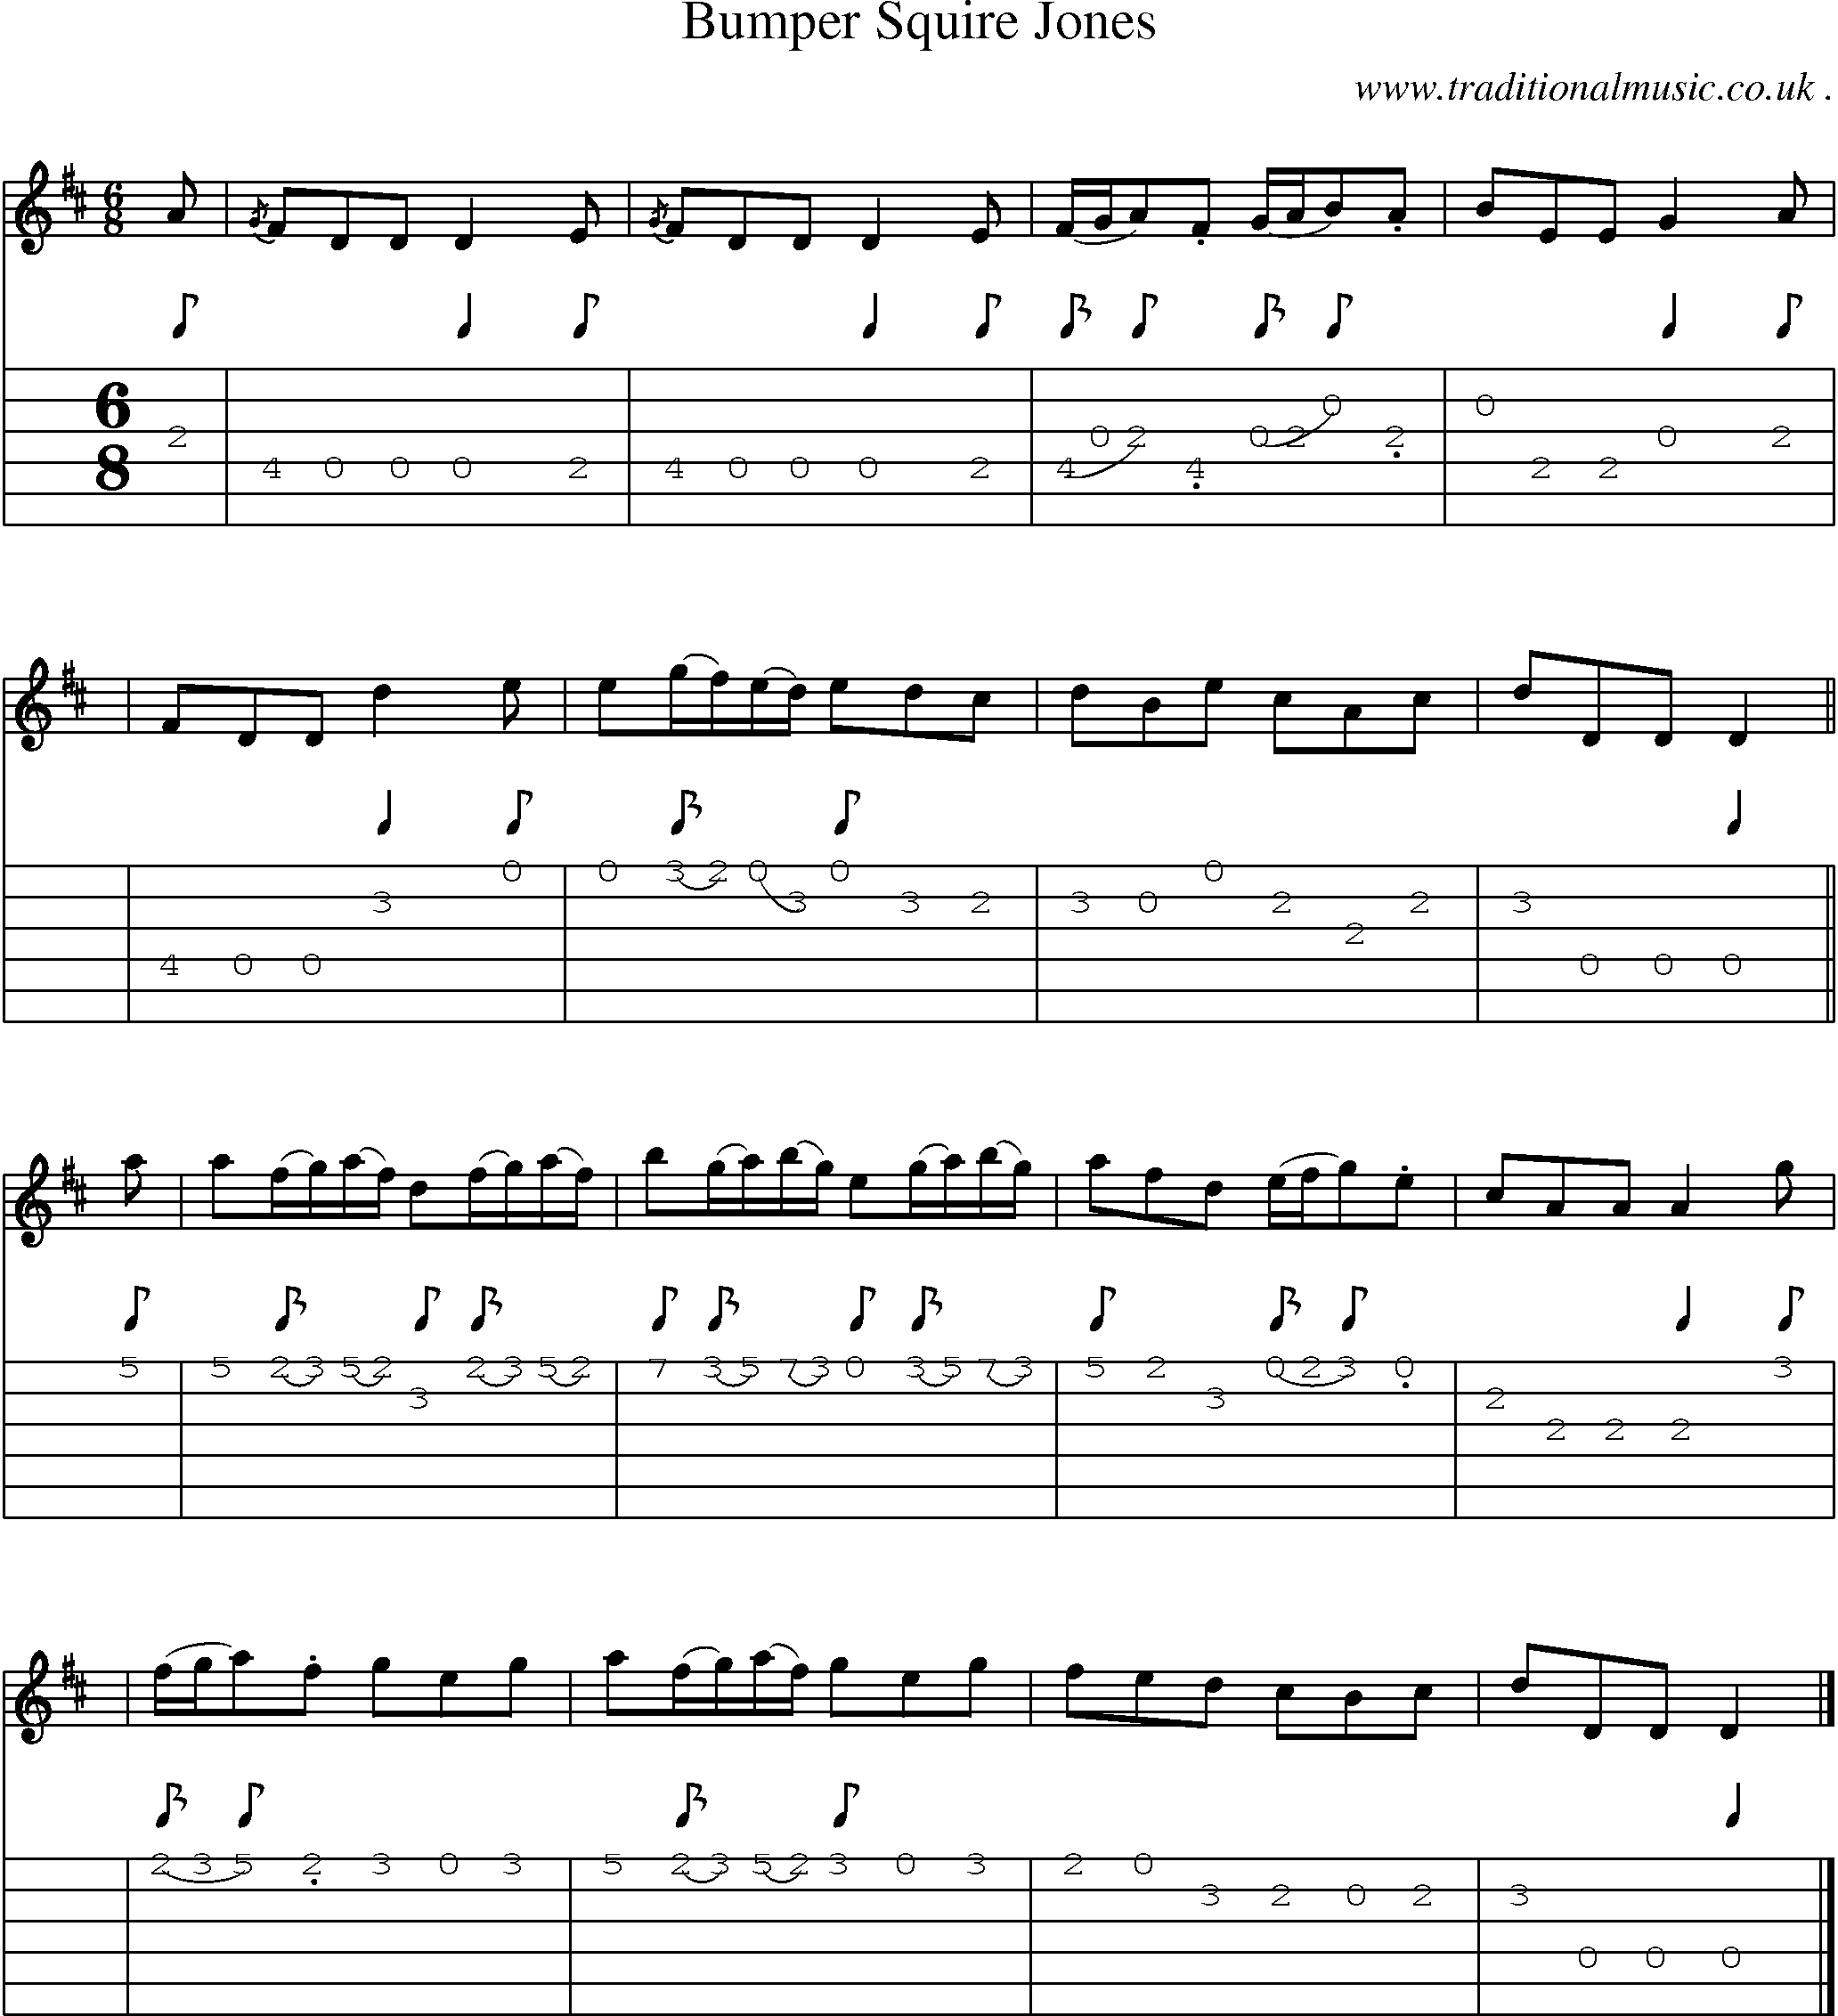 Sheet-music  score, Chords and Guitar Tabs for Bumper Squire Jones